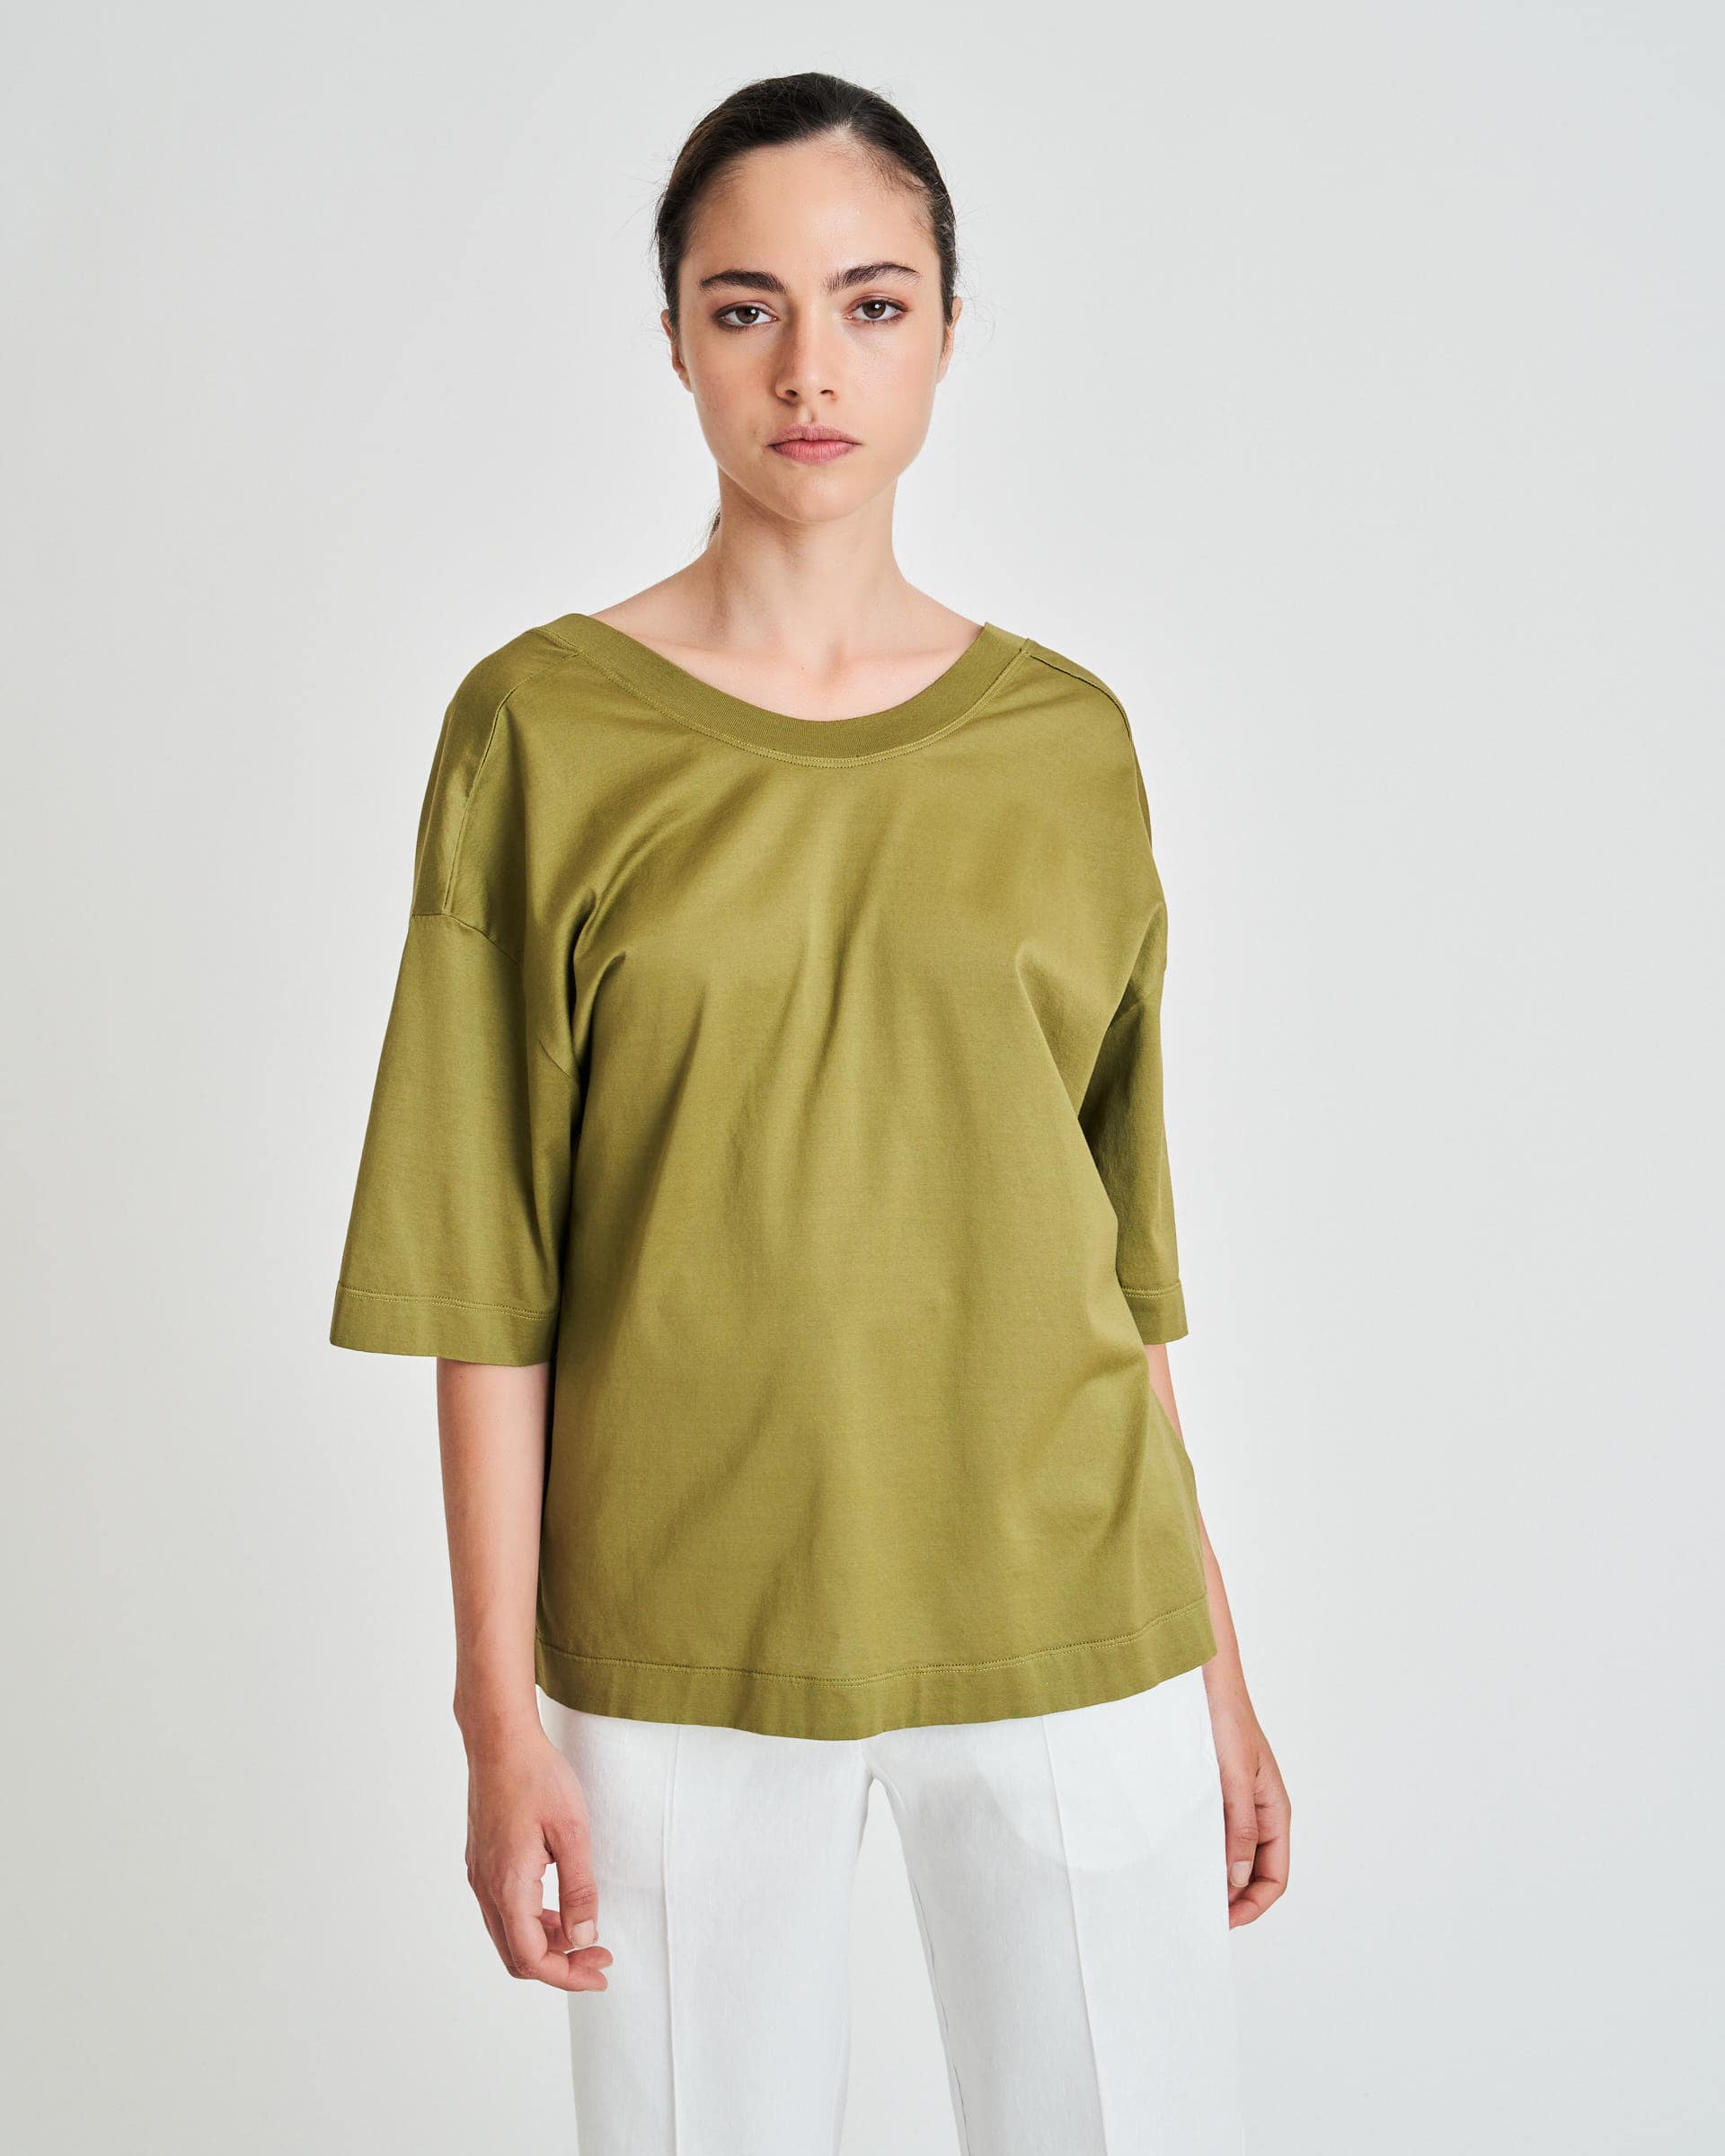 The Market Store | T-shirt With Neckline On The Back